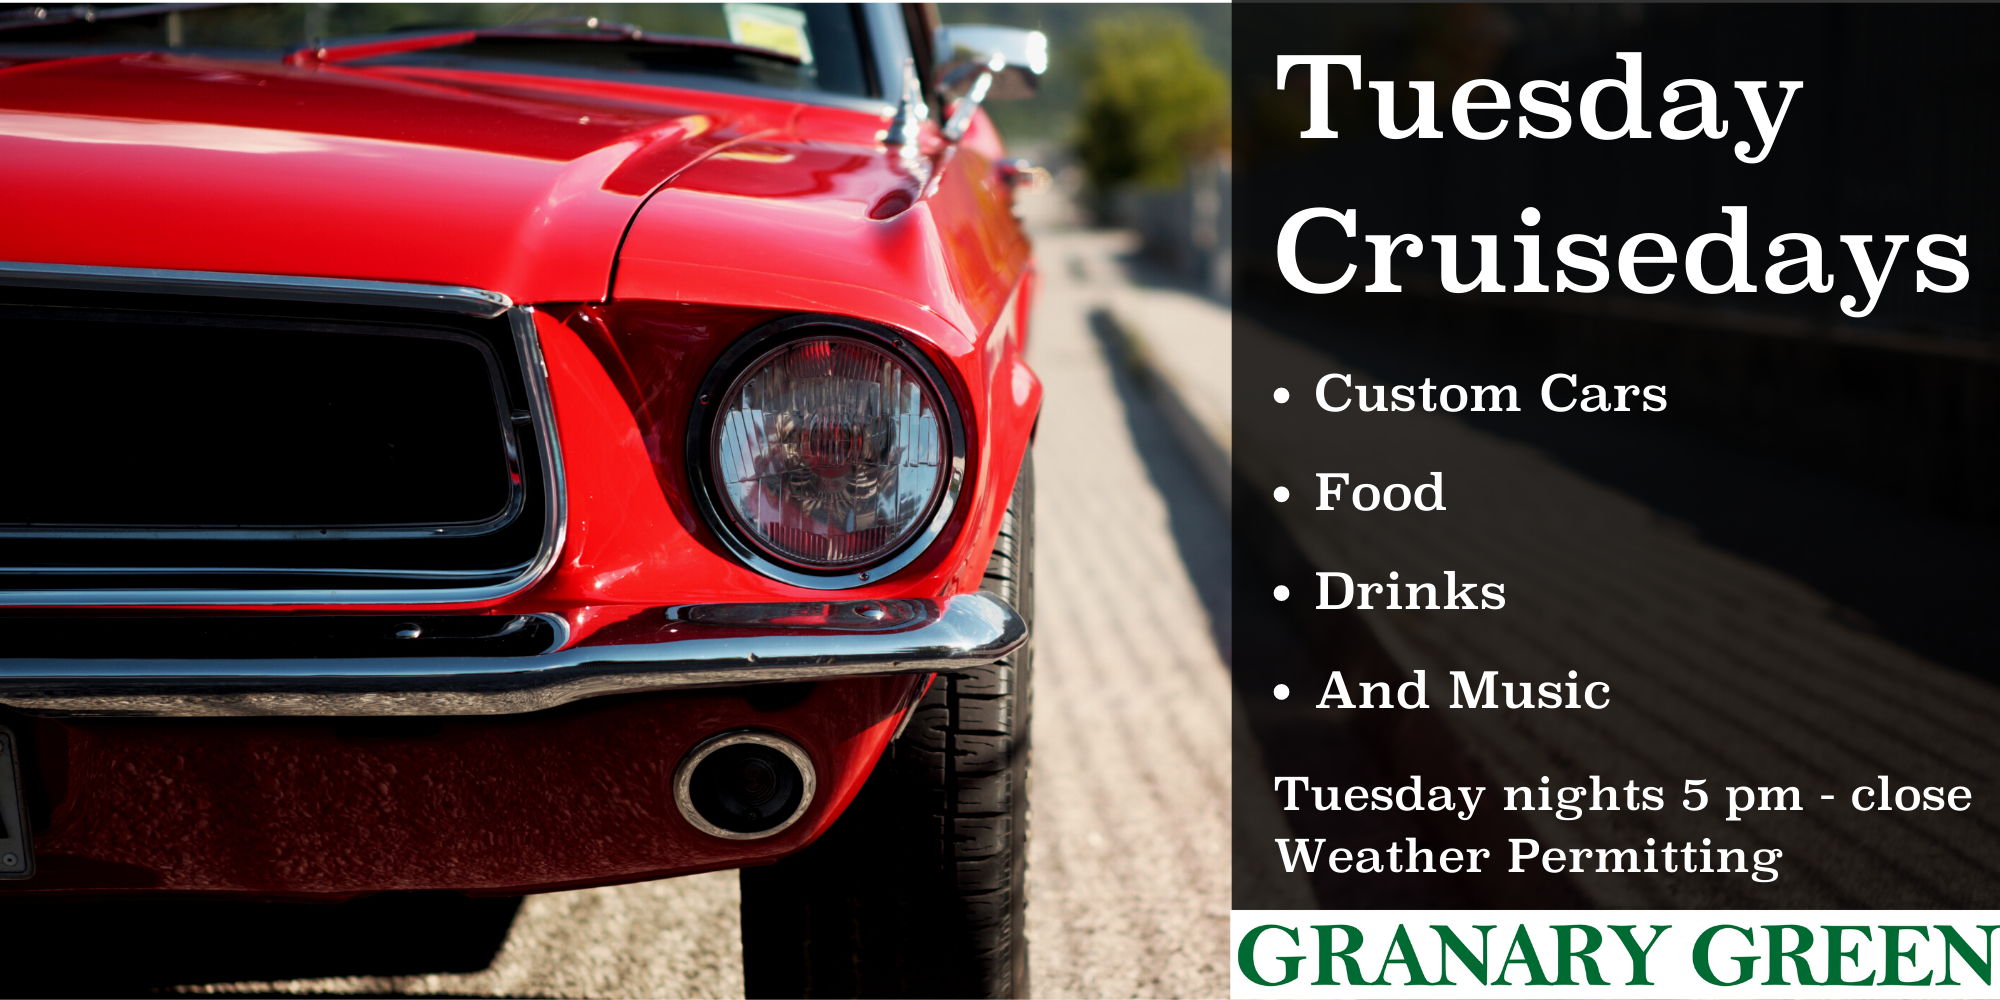 Tuesday Cruiseday at the Granary Green promotional image